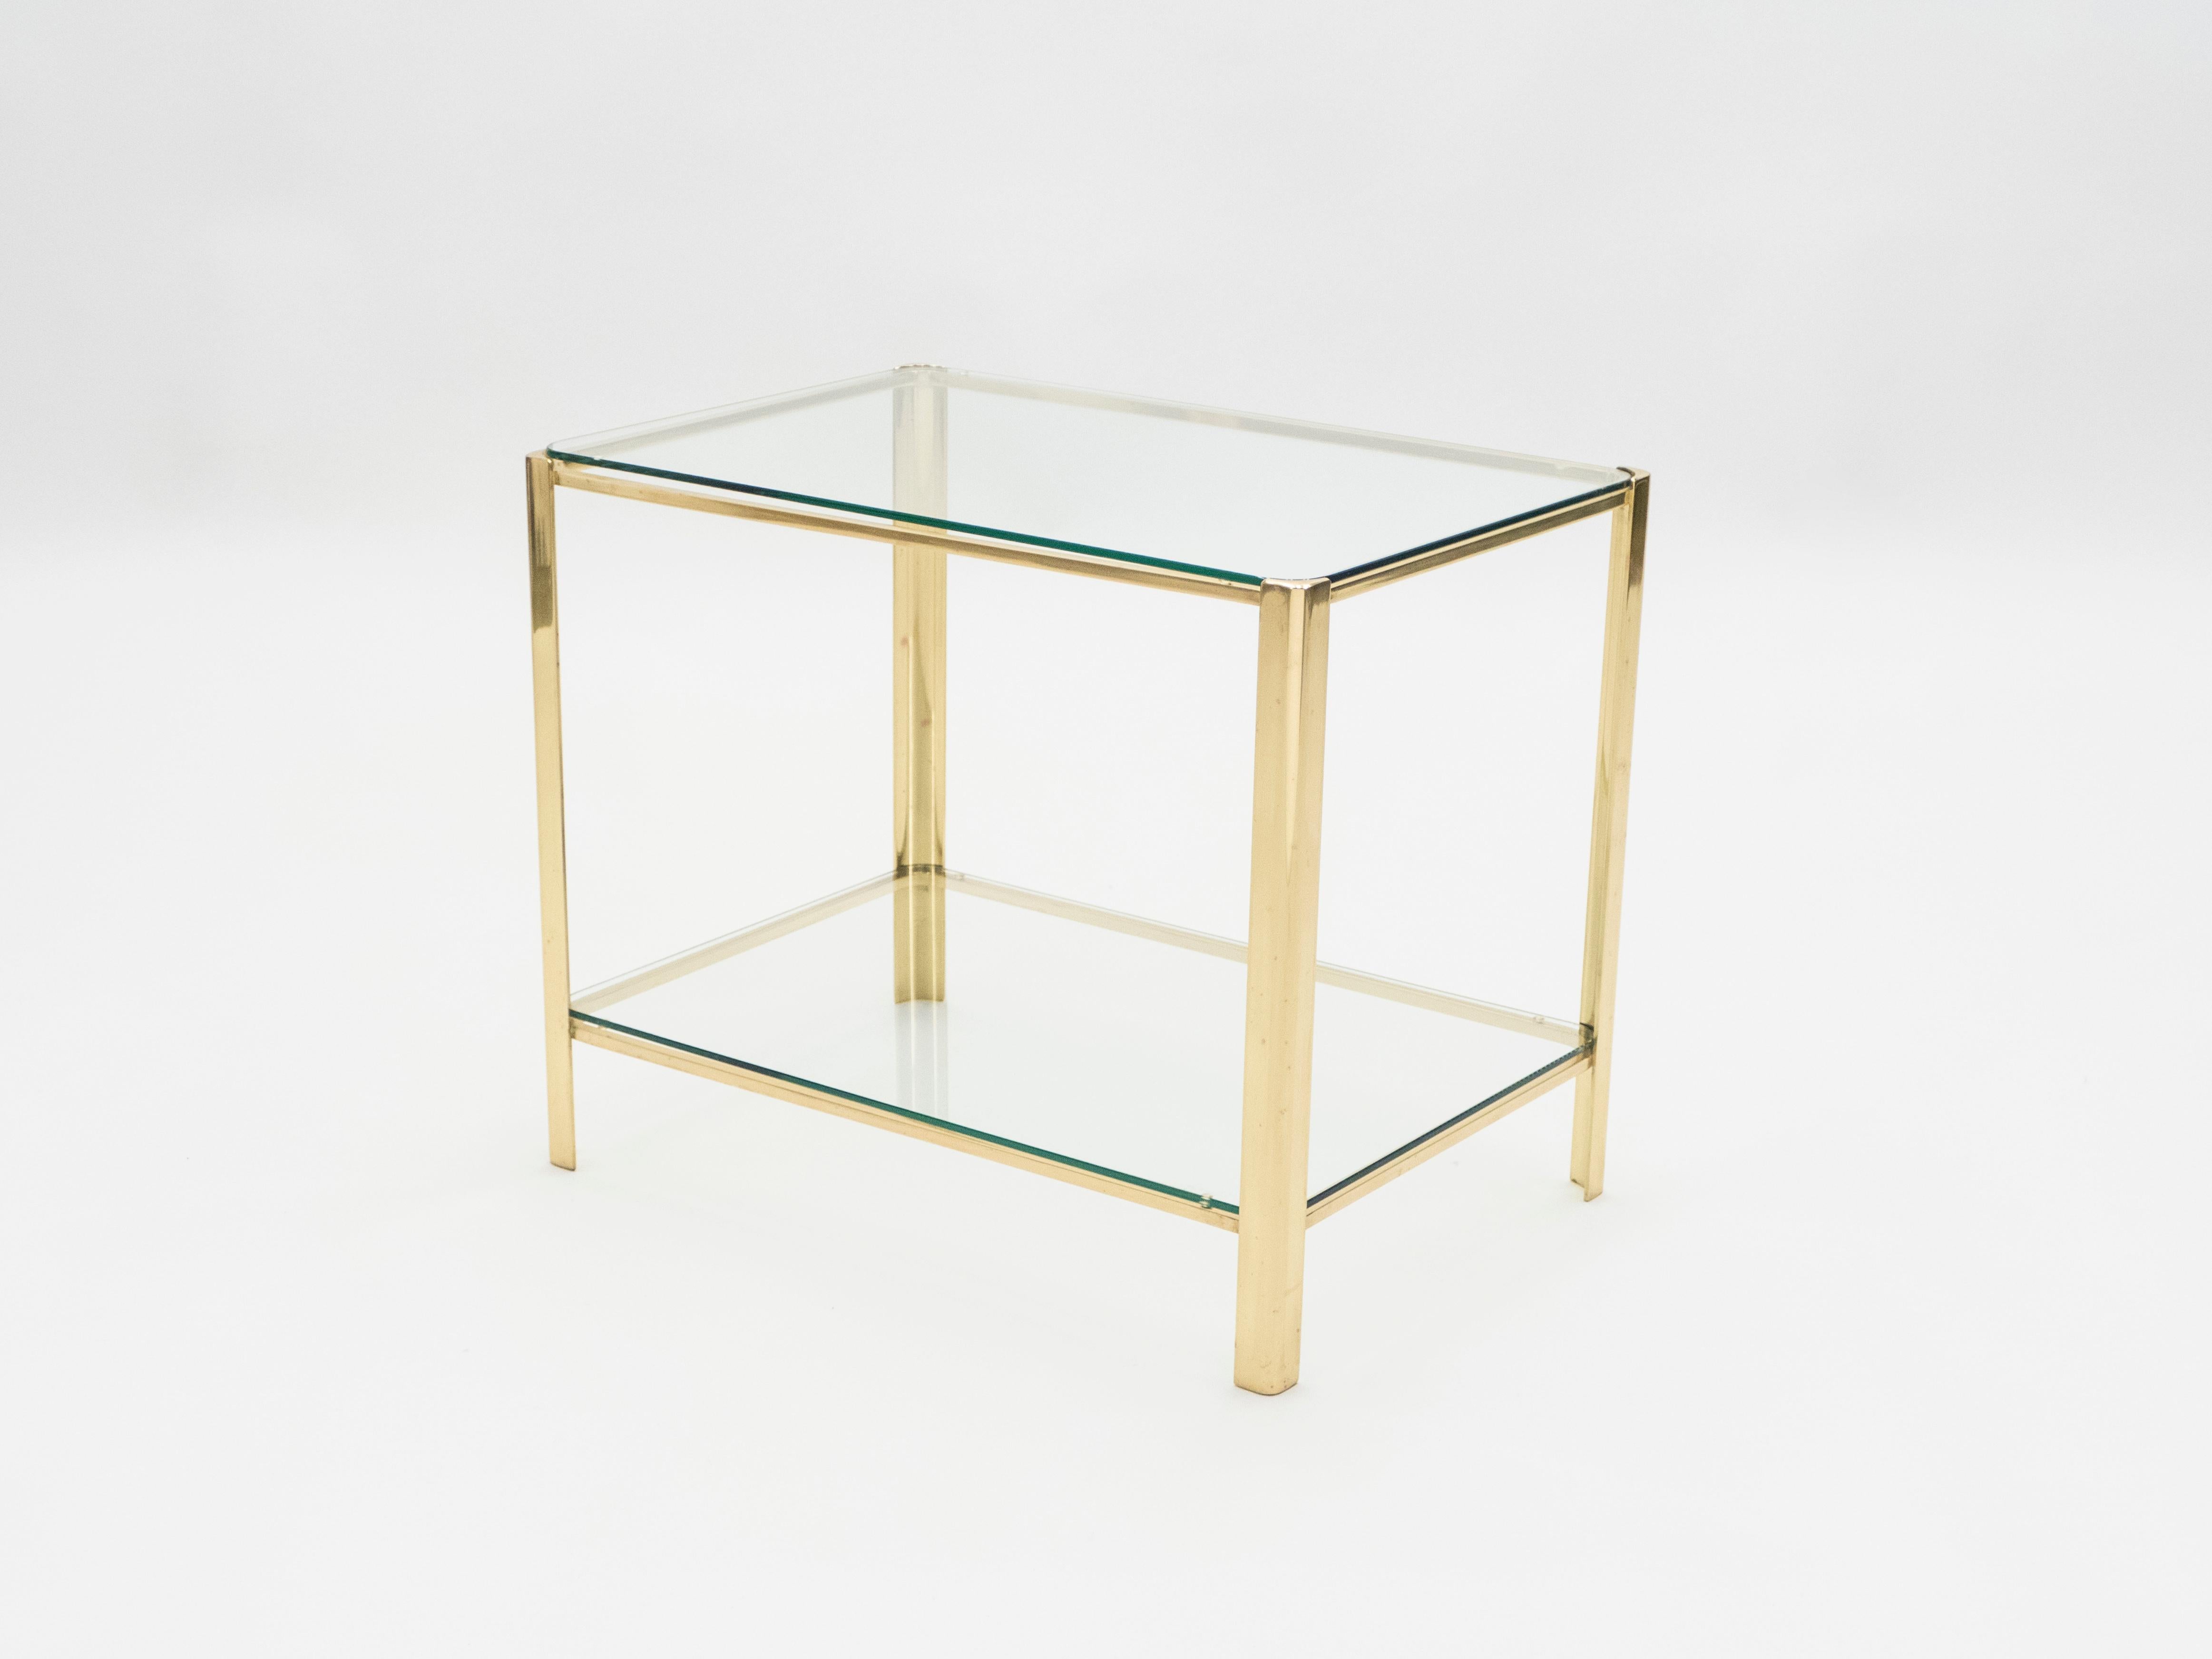 French Bronze occasional side table by Jacques Quinet for Broncz, 1960s For Sale 1